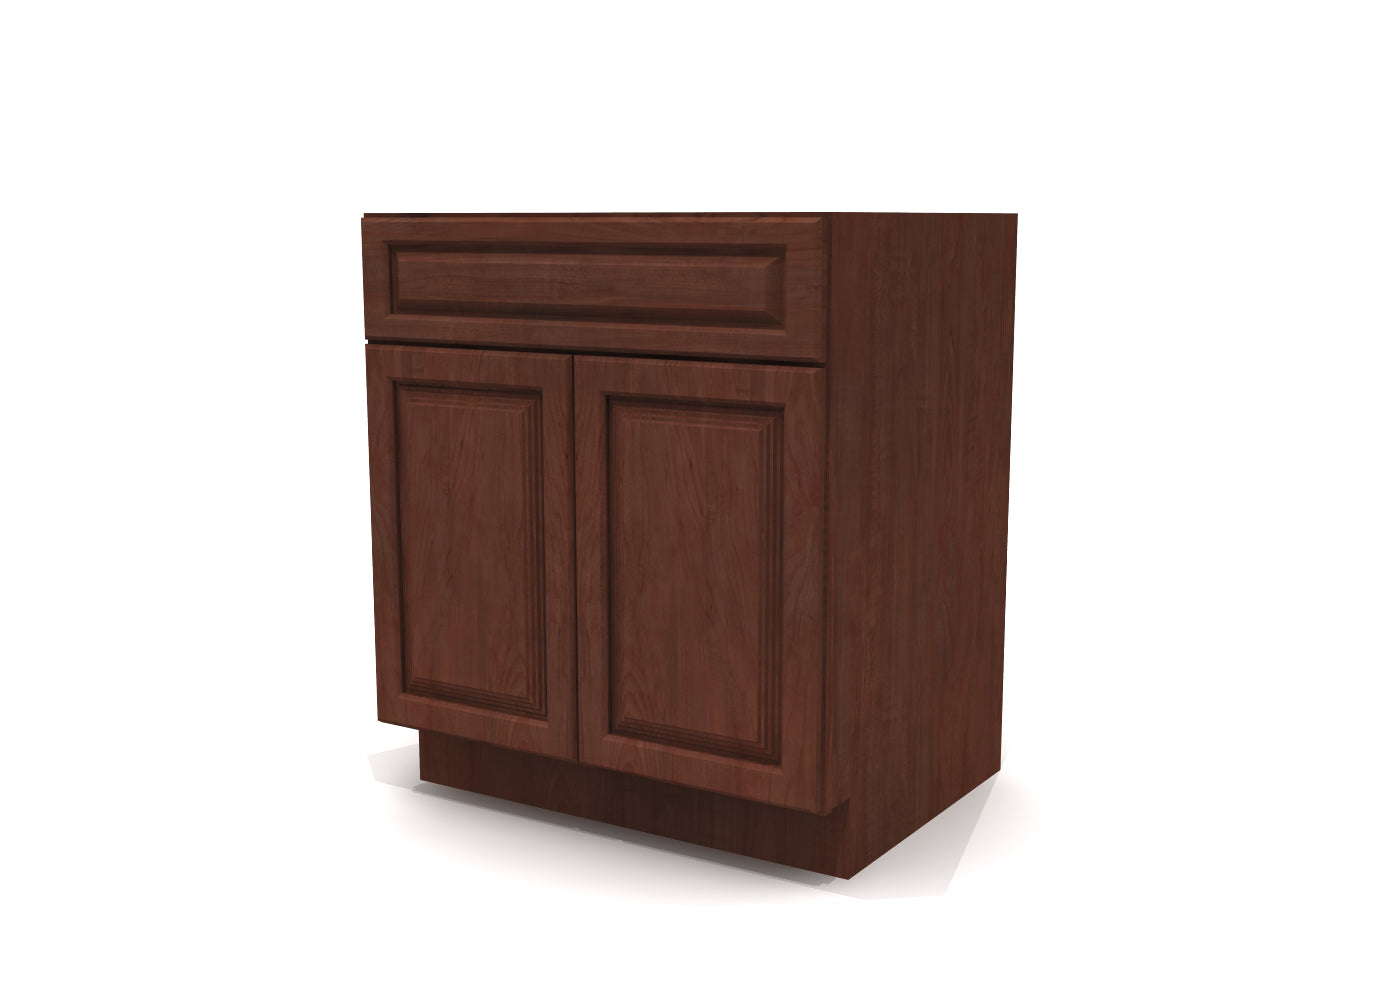 Base Double Door One Drawer 30" Wide Cherry Raised Panel Cabinet